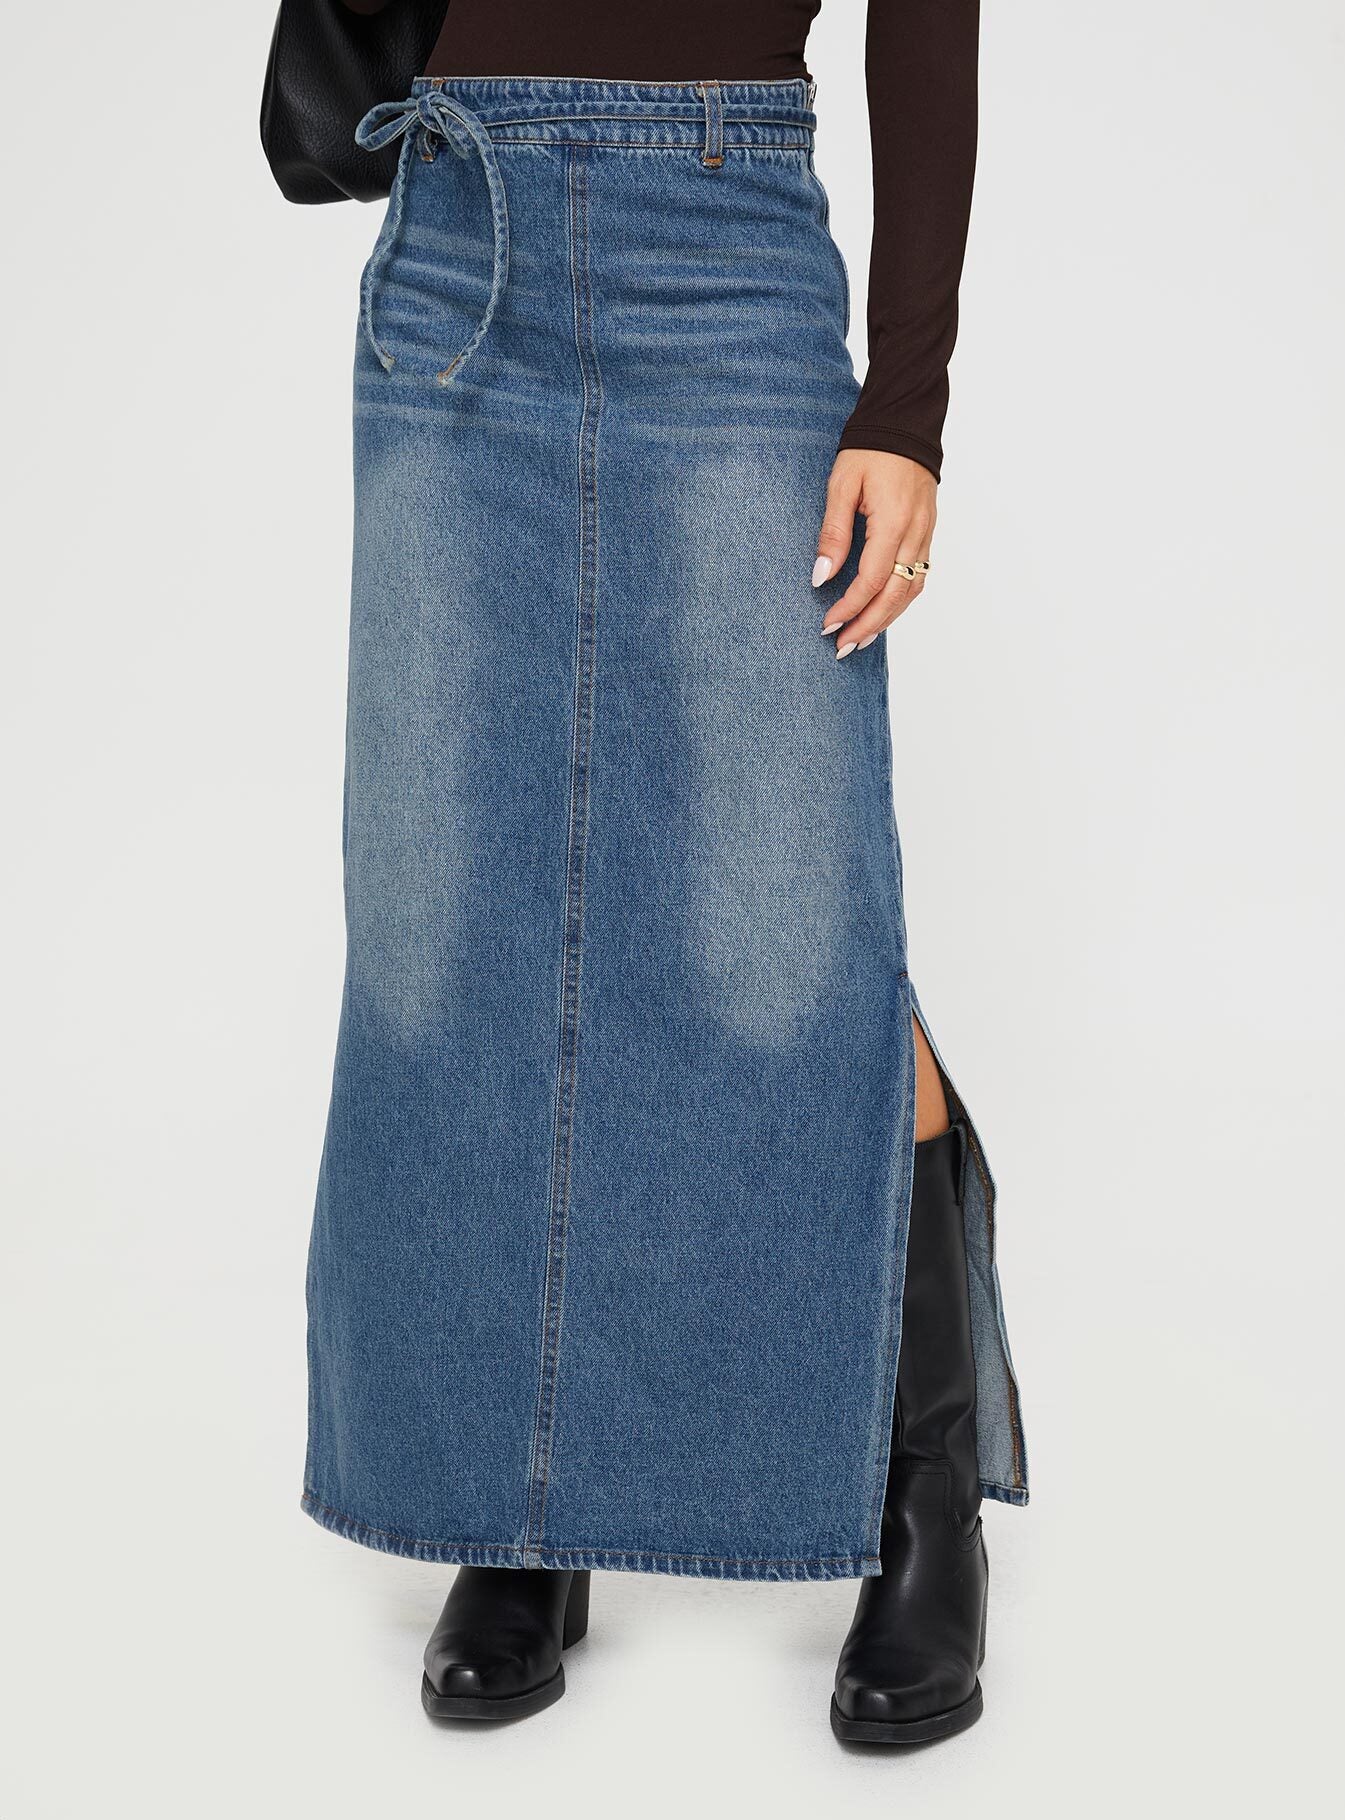 32 outfits in 2022: What to wear with a long denim skirt? | Denim skirt  outfit fall, Denim skirt trend, Jean skirt outfits fall